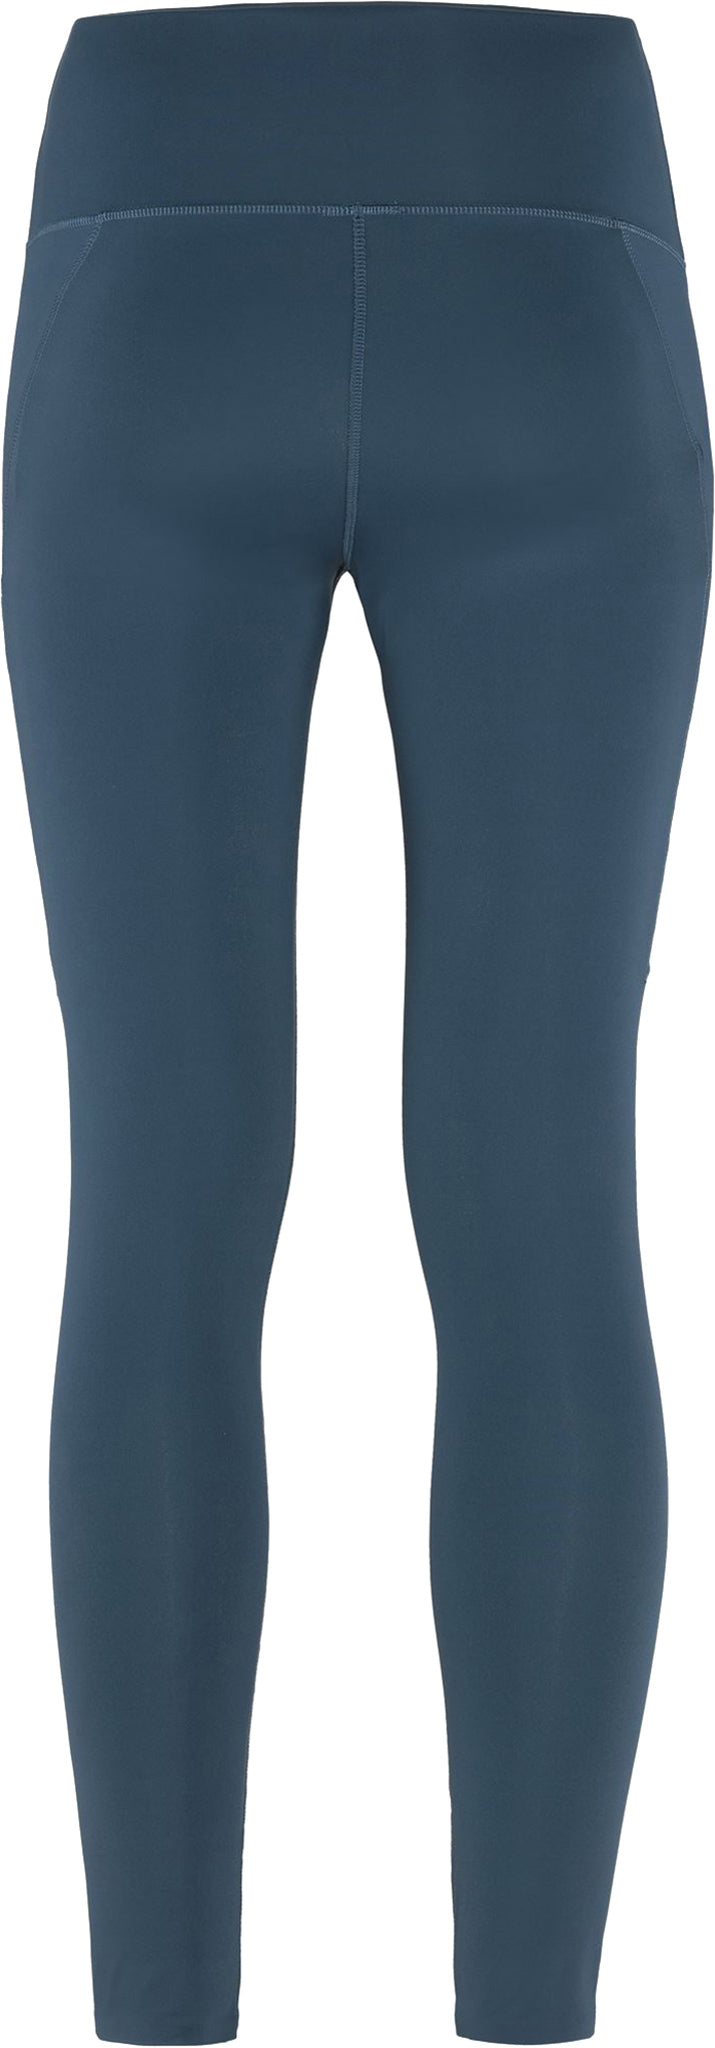 Baby Adjustable and Breathable Leggings 500 - Navy Blue